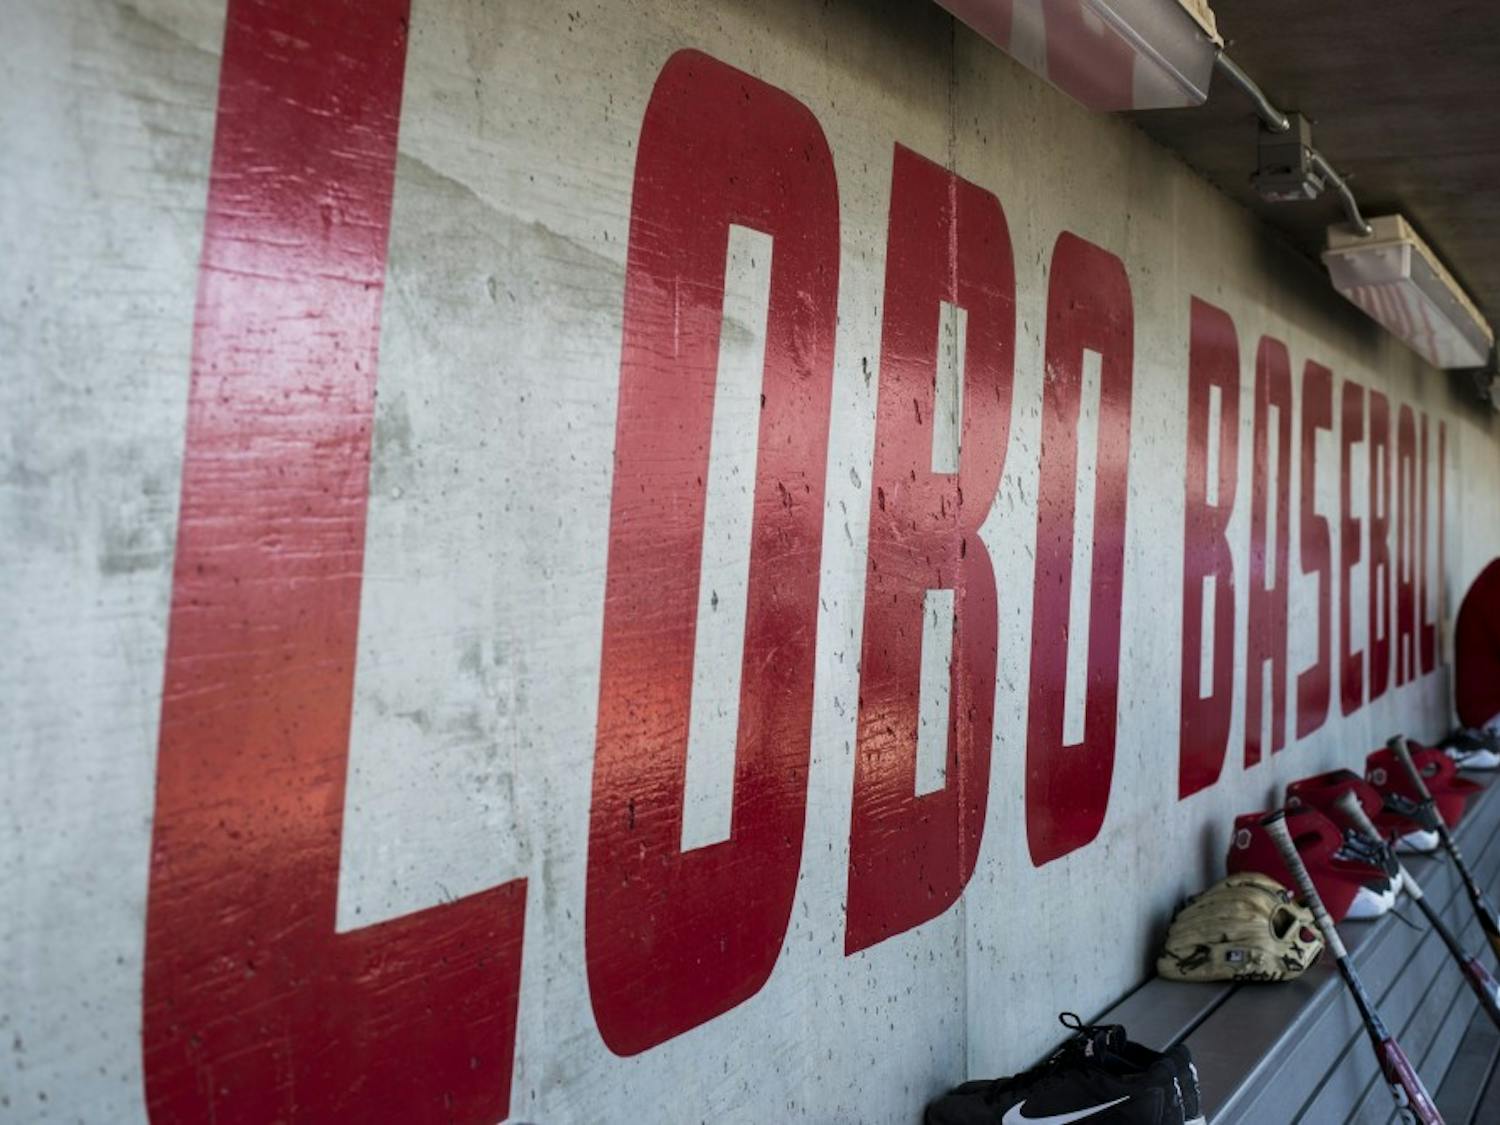 University of New Mexico head baseball coach Ray Birmingham sits against the wall of the home dugout at Santa Ana Star Field during the Lobos annual media day on Feb. 9, 2018. The Lobos open the season this Friday against Oregon State.